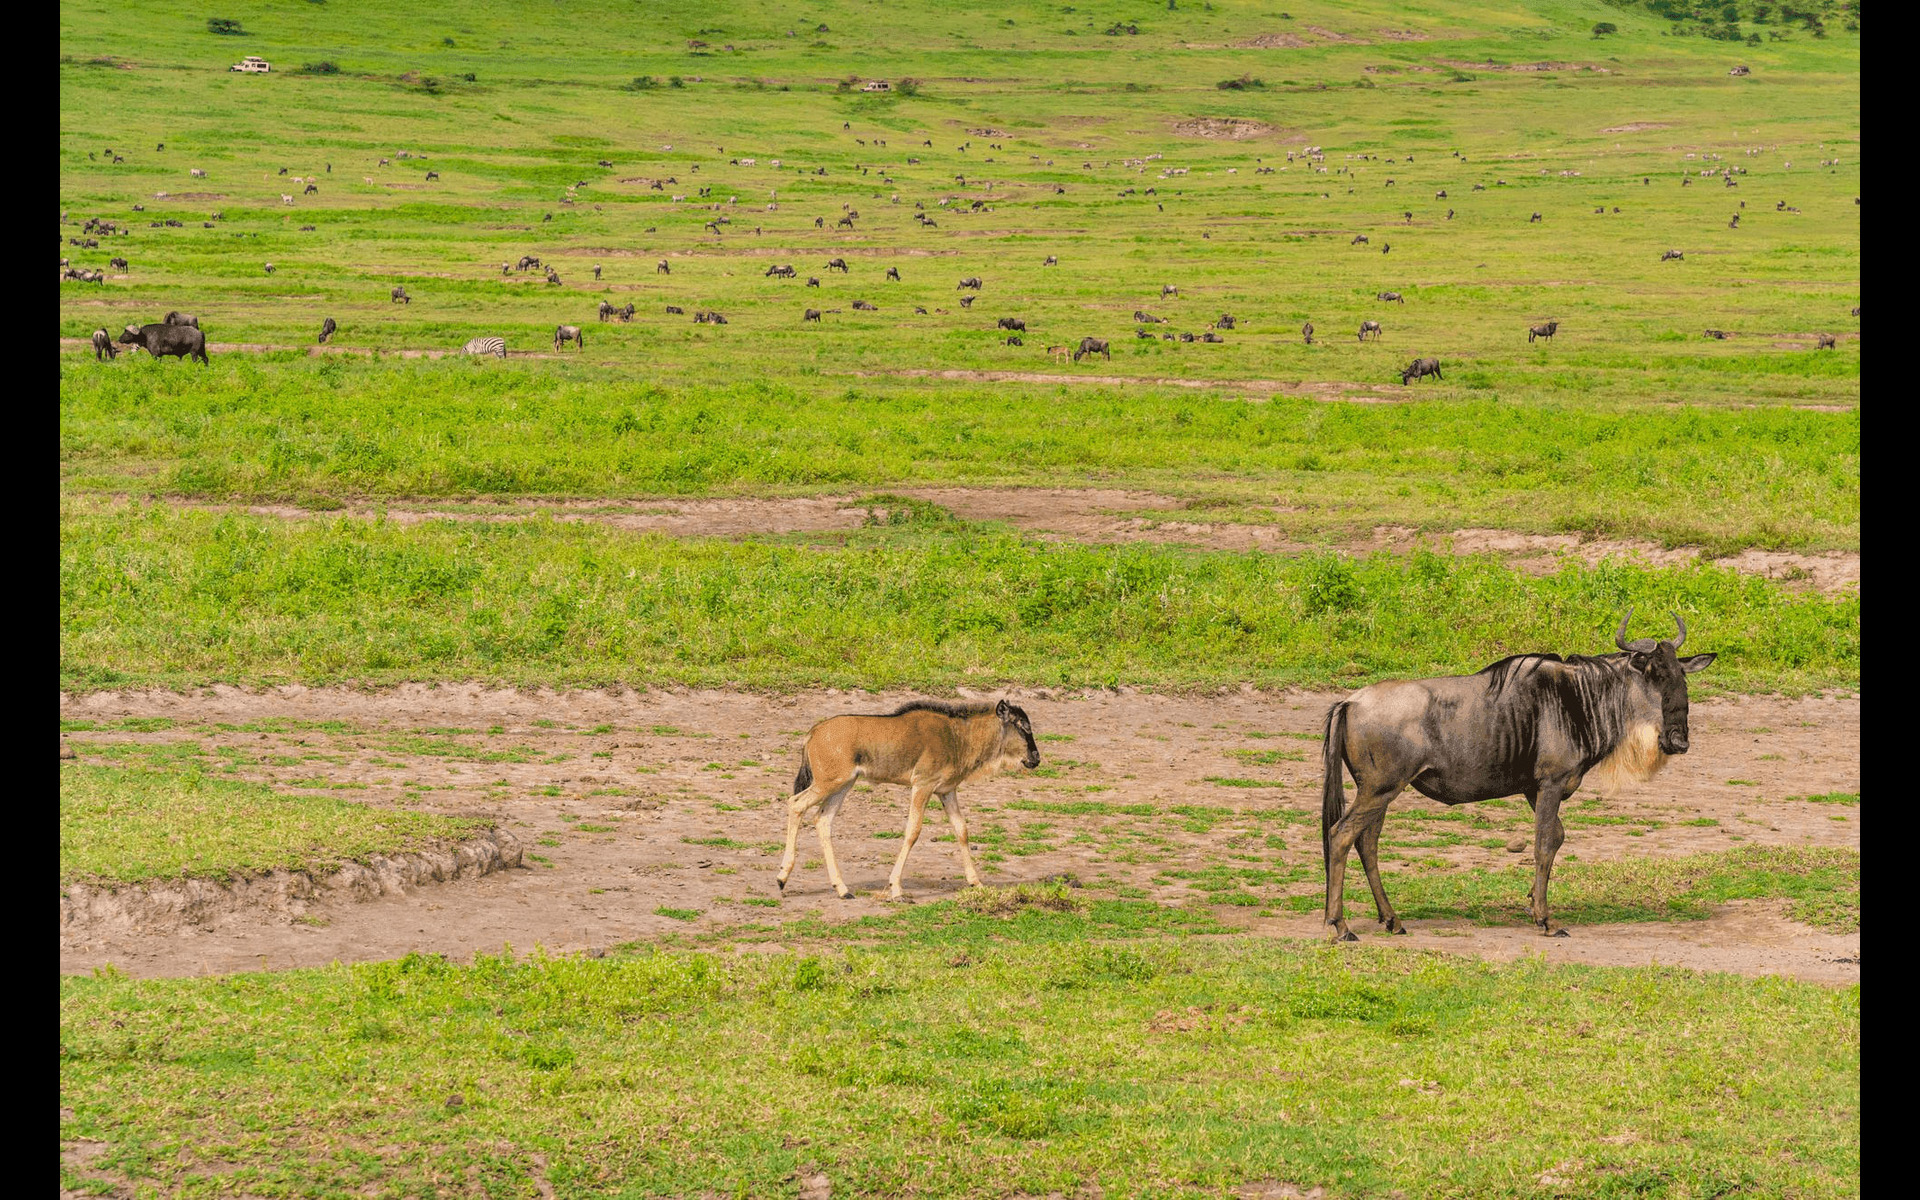 Discovering the Wild: Serengeti National Park Tour Packages from India | TheAmberPost